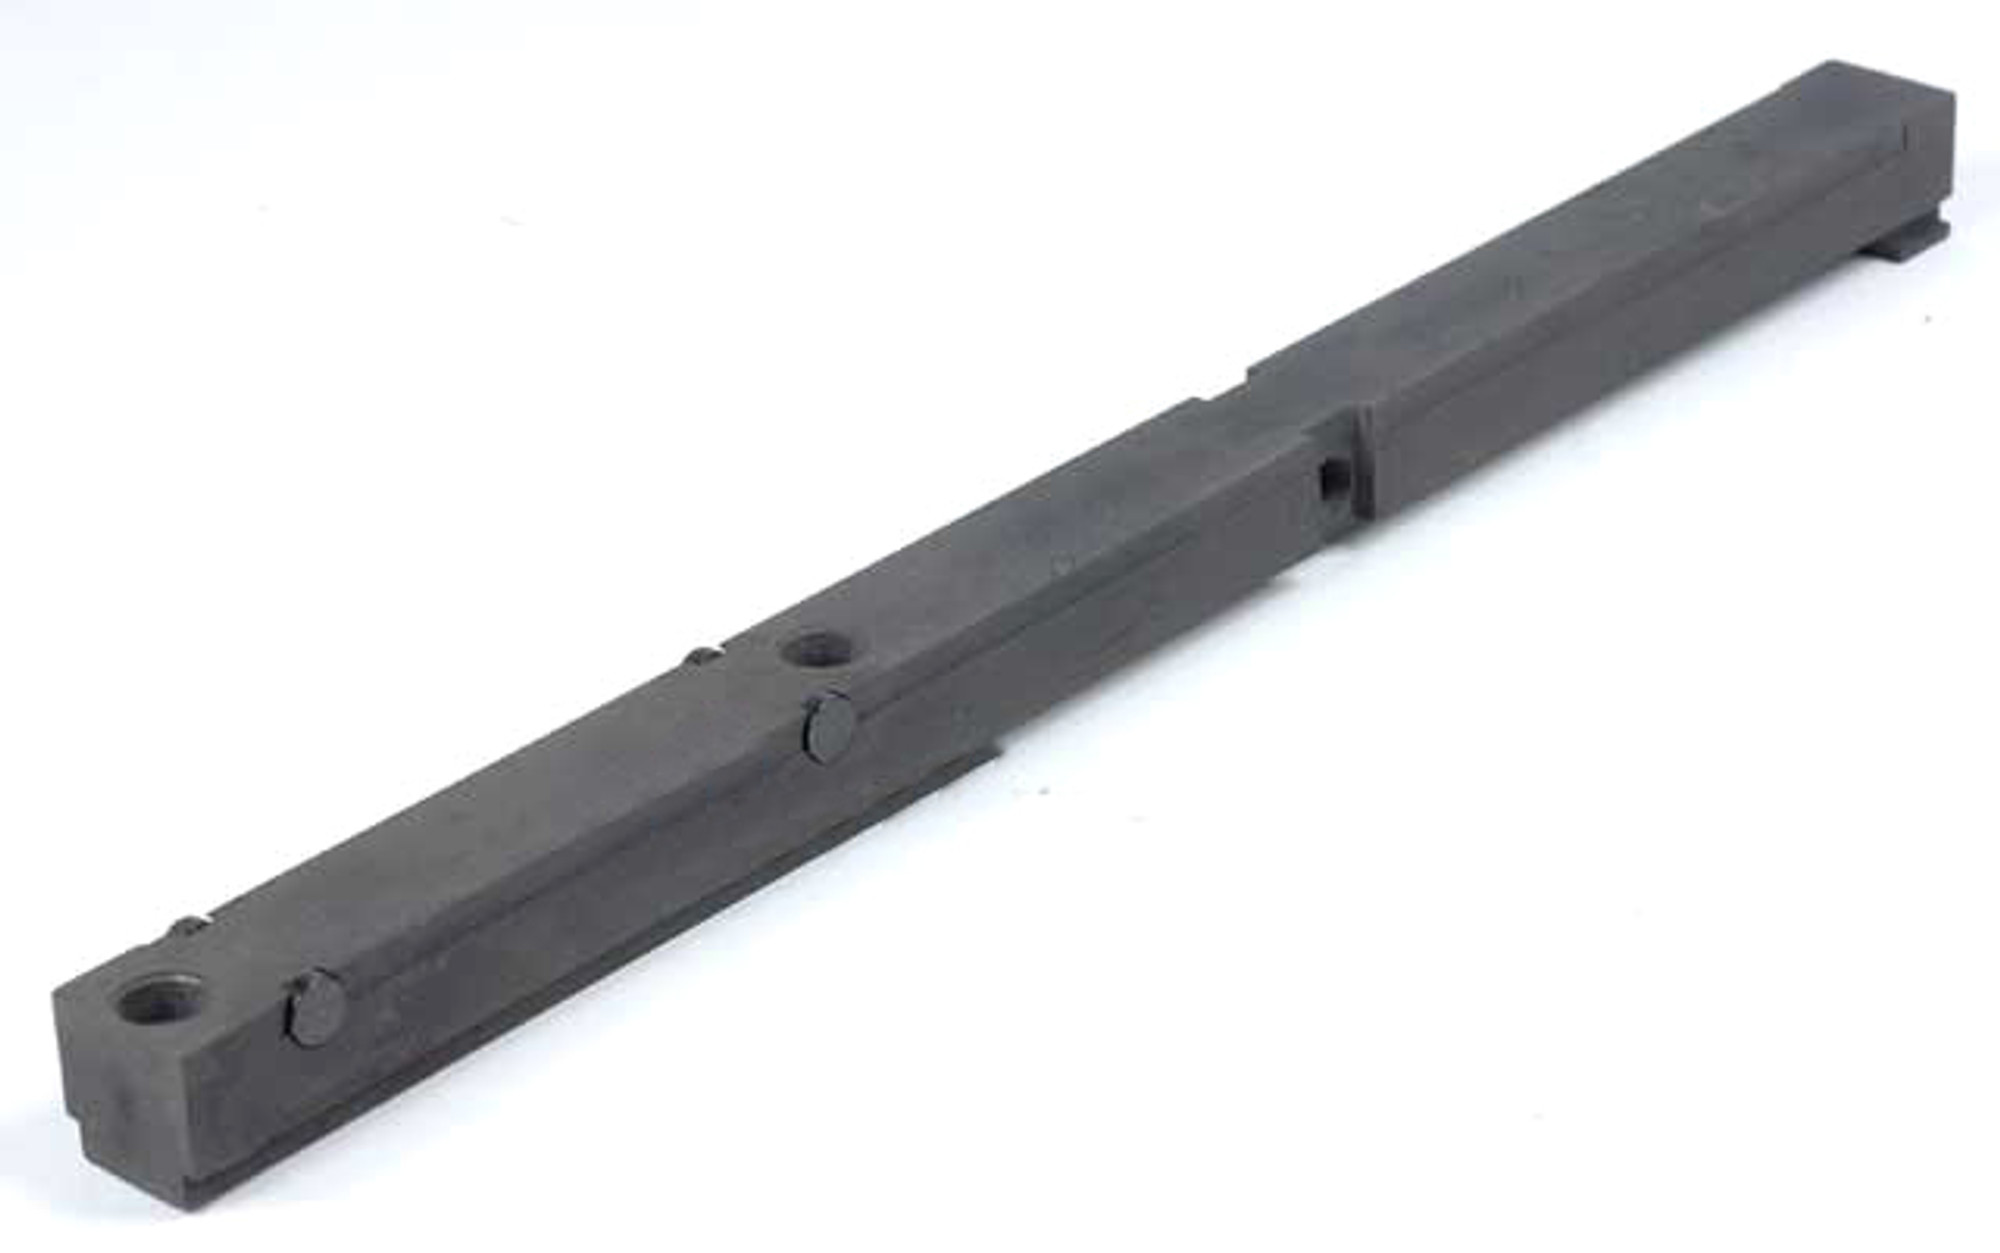 Replacement Charging Handle w/ Rollers for WE SCAR Gas Blowback Airsoft Rifle